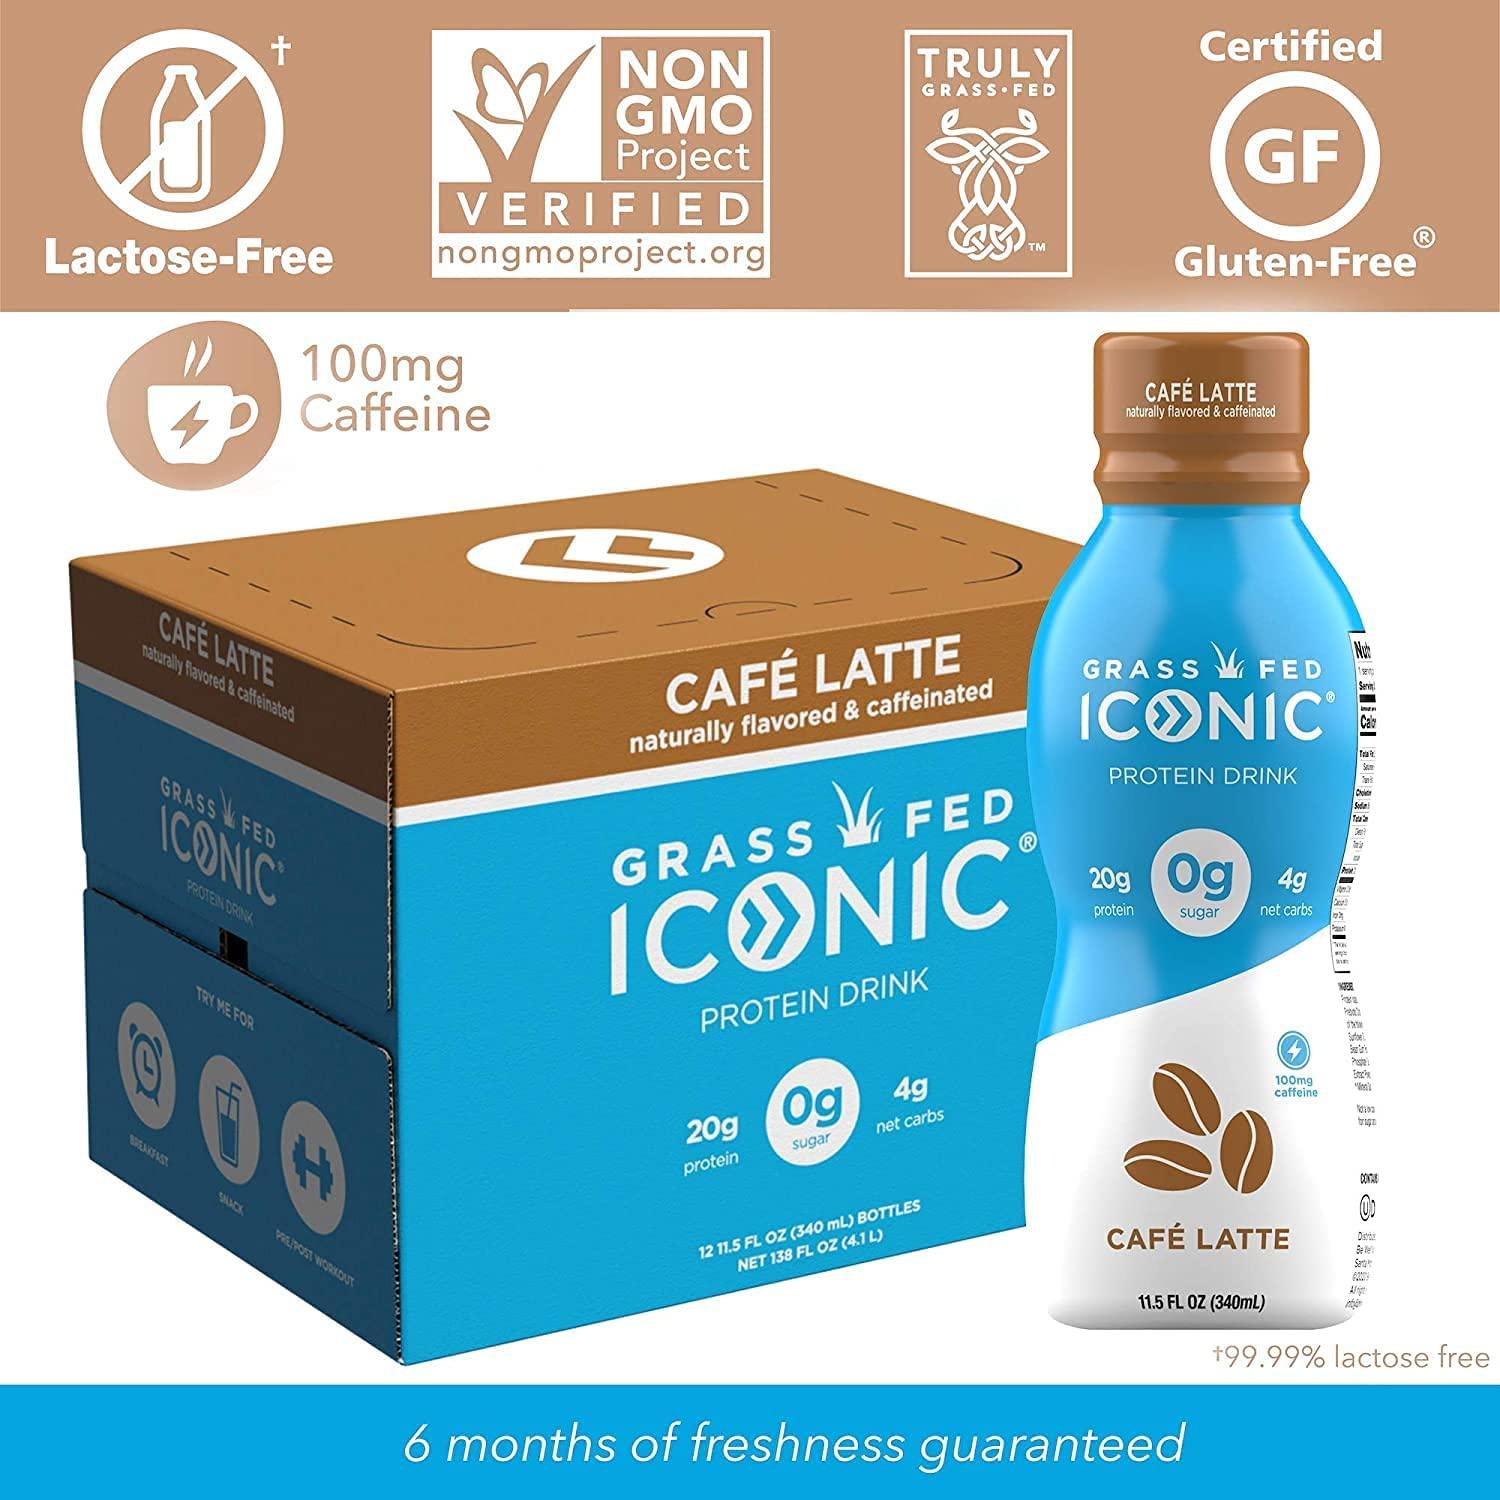  Iconic Protein Drinks, Vanilla Bean (4 Pack), Low Calorie,  Grass Fed, High Protein Shakes, Lactose Free, Gluten Free, Non-GMO, Kosher, Low Carb Snack & Healthy Breakfast Drink